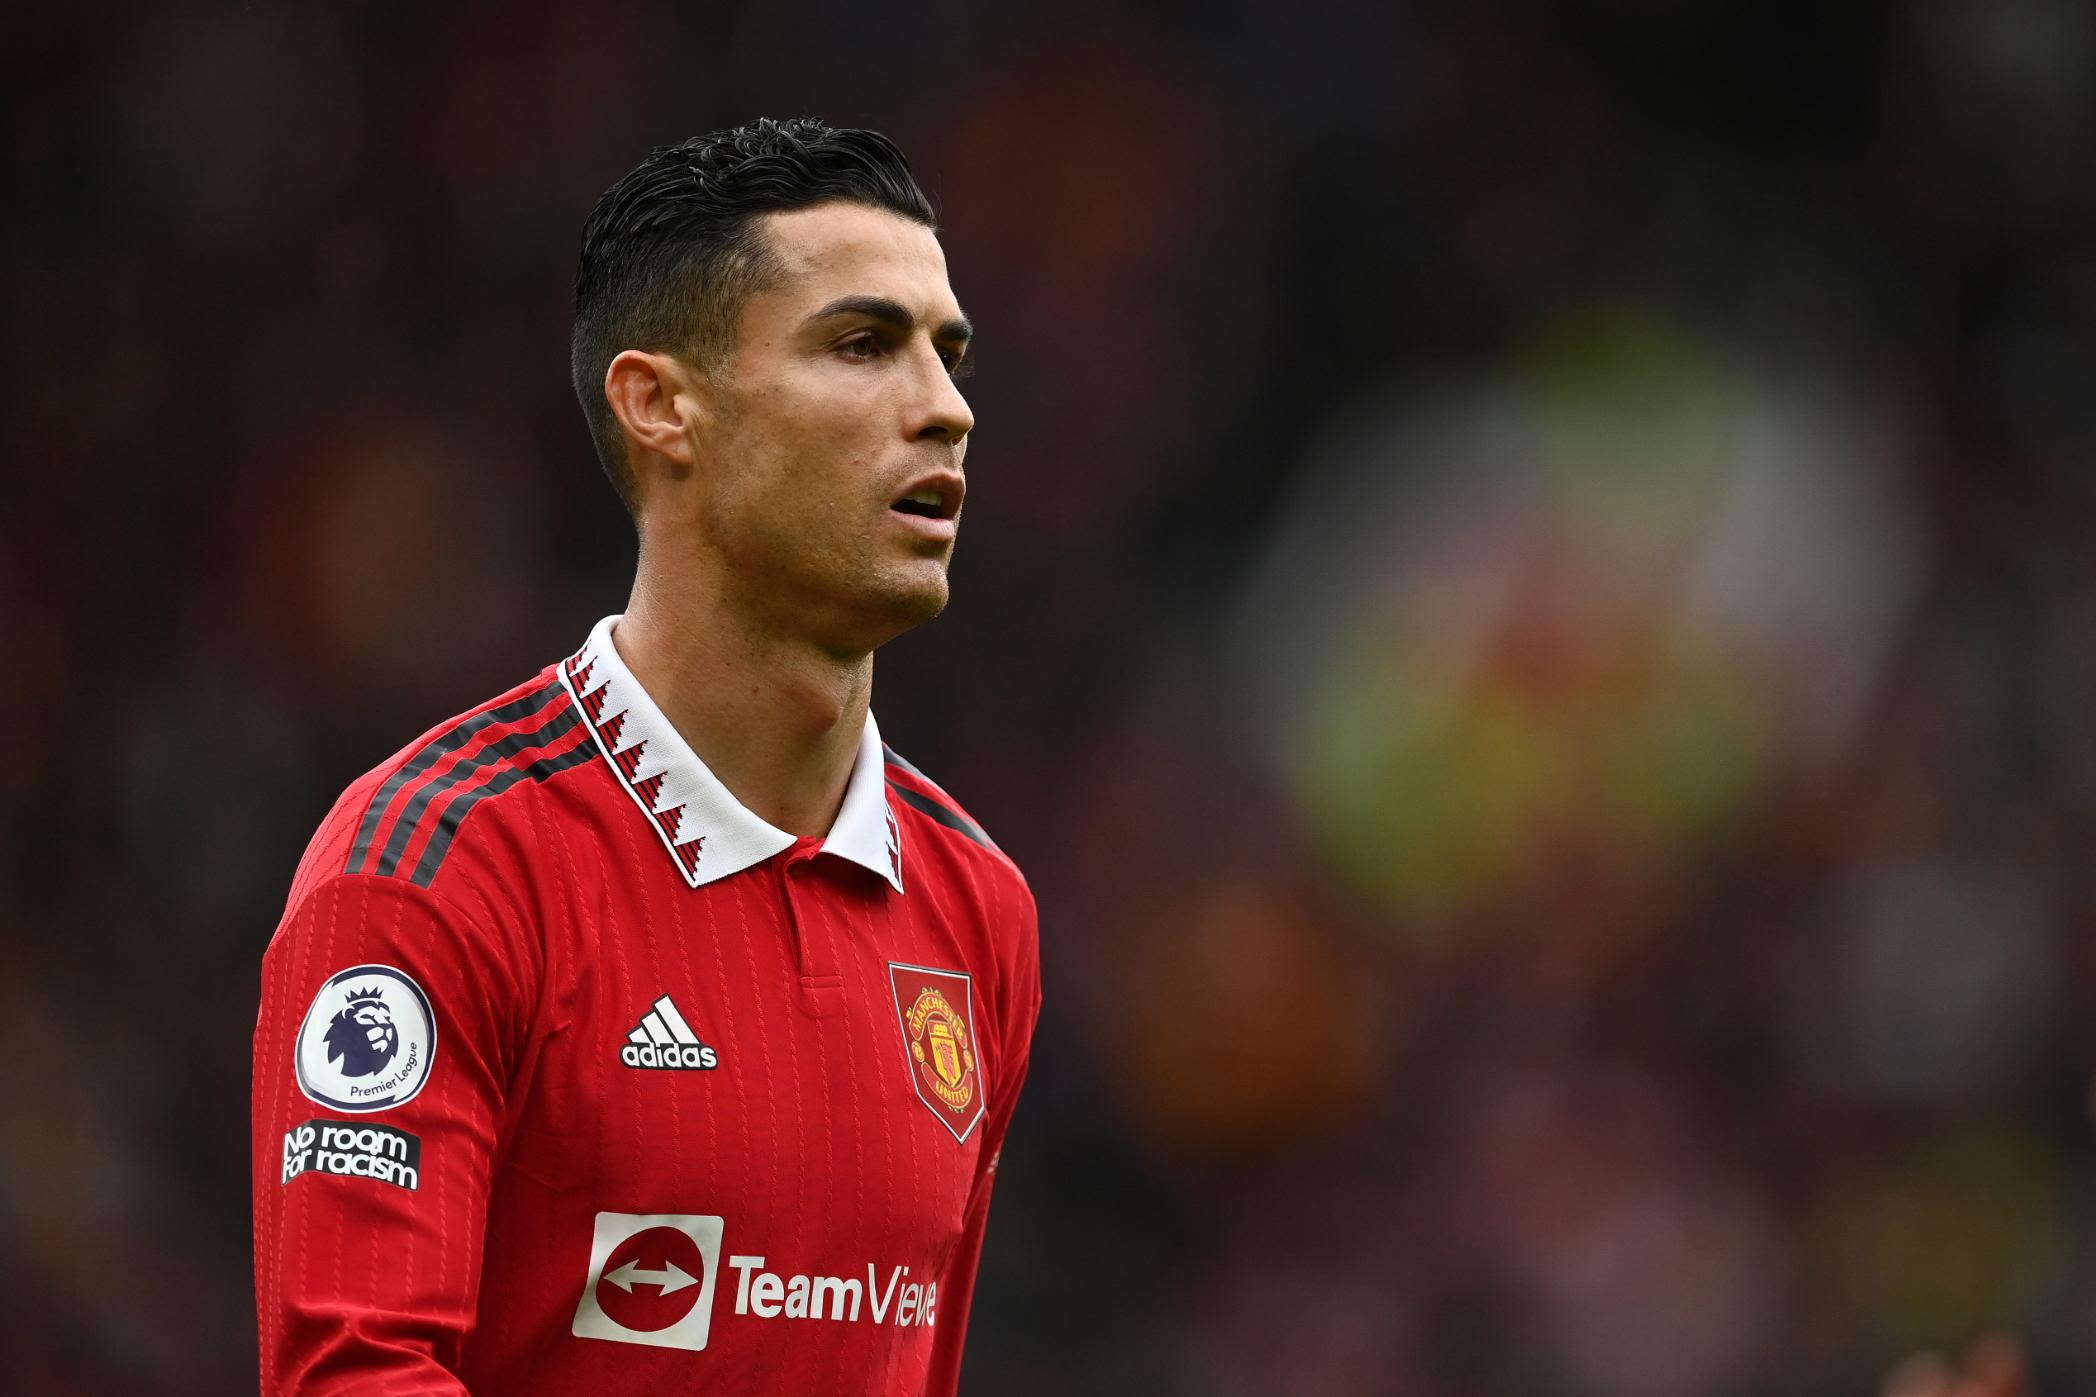 Ronaldo United Exit: Before Portugal's World Cup opener, Manchester United TEAR UP Cristiano Ronaldo's contract with immediate effect - Check out